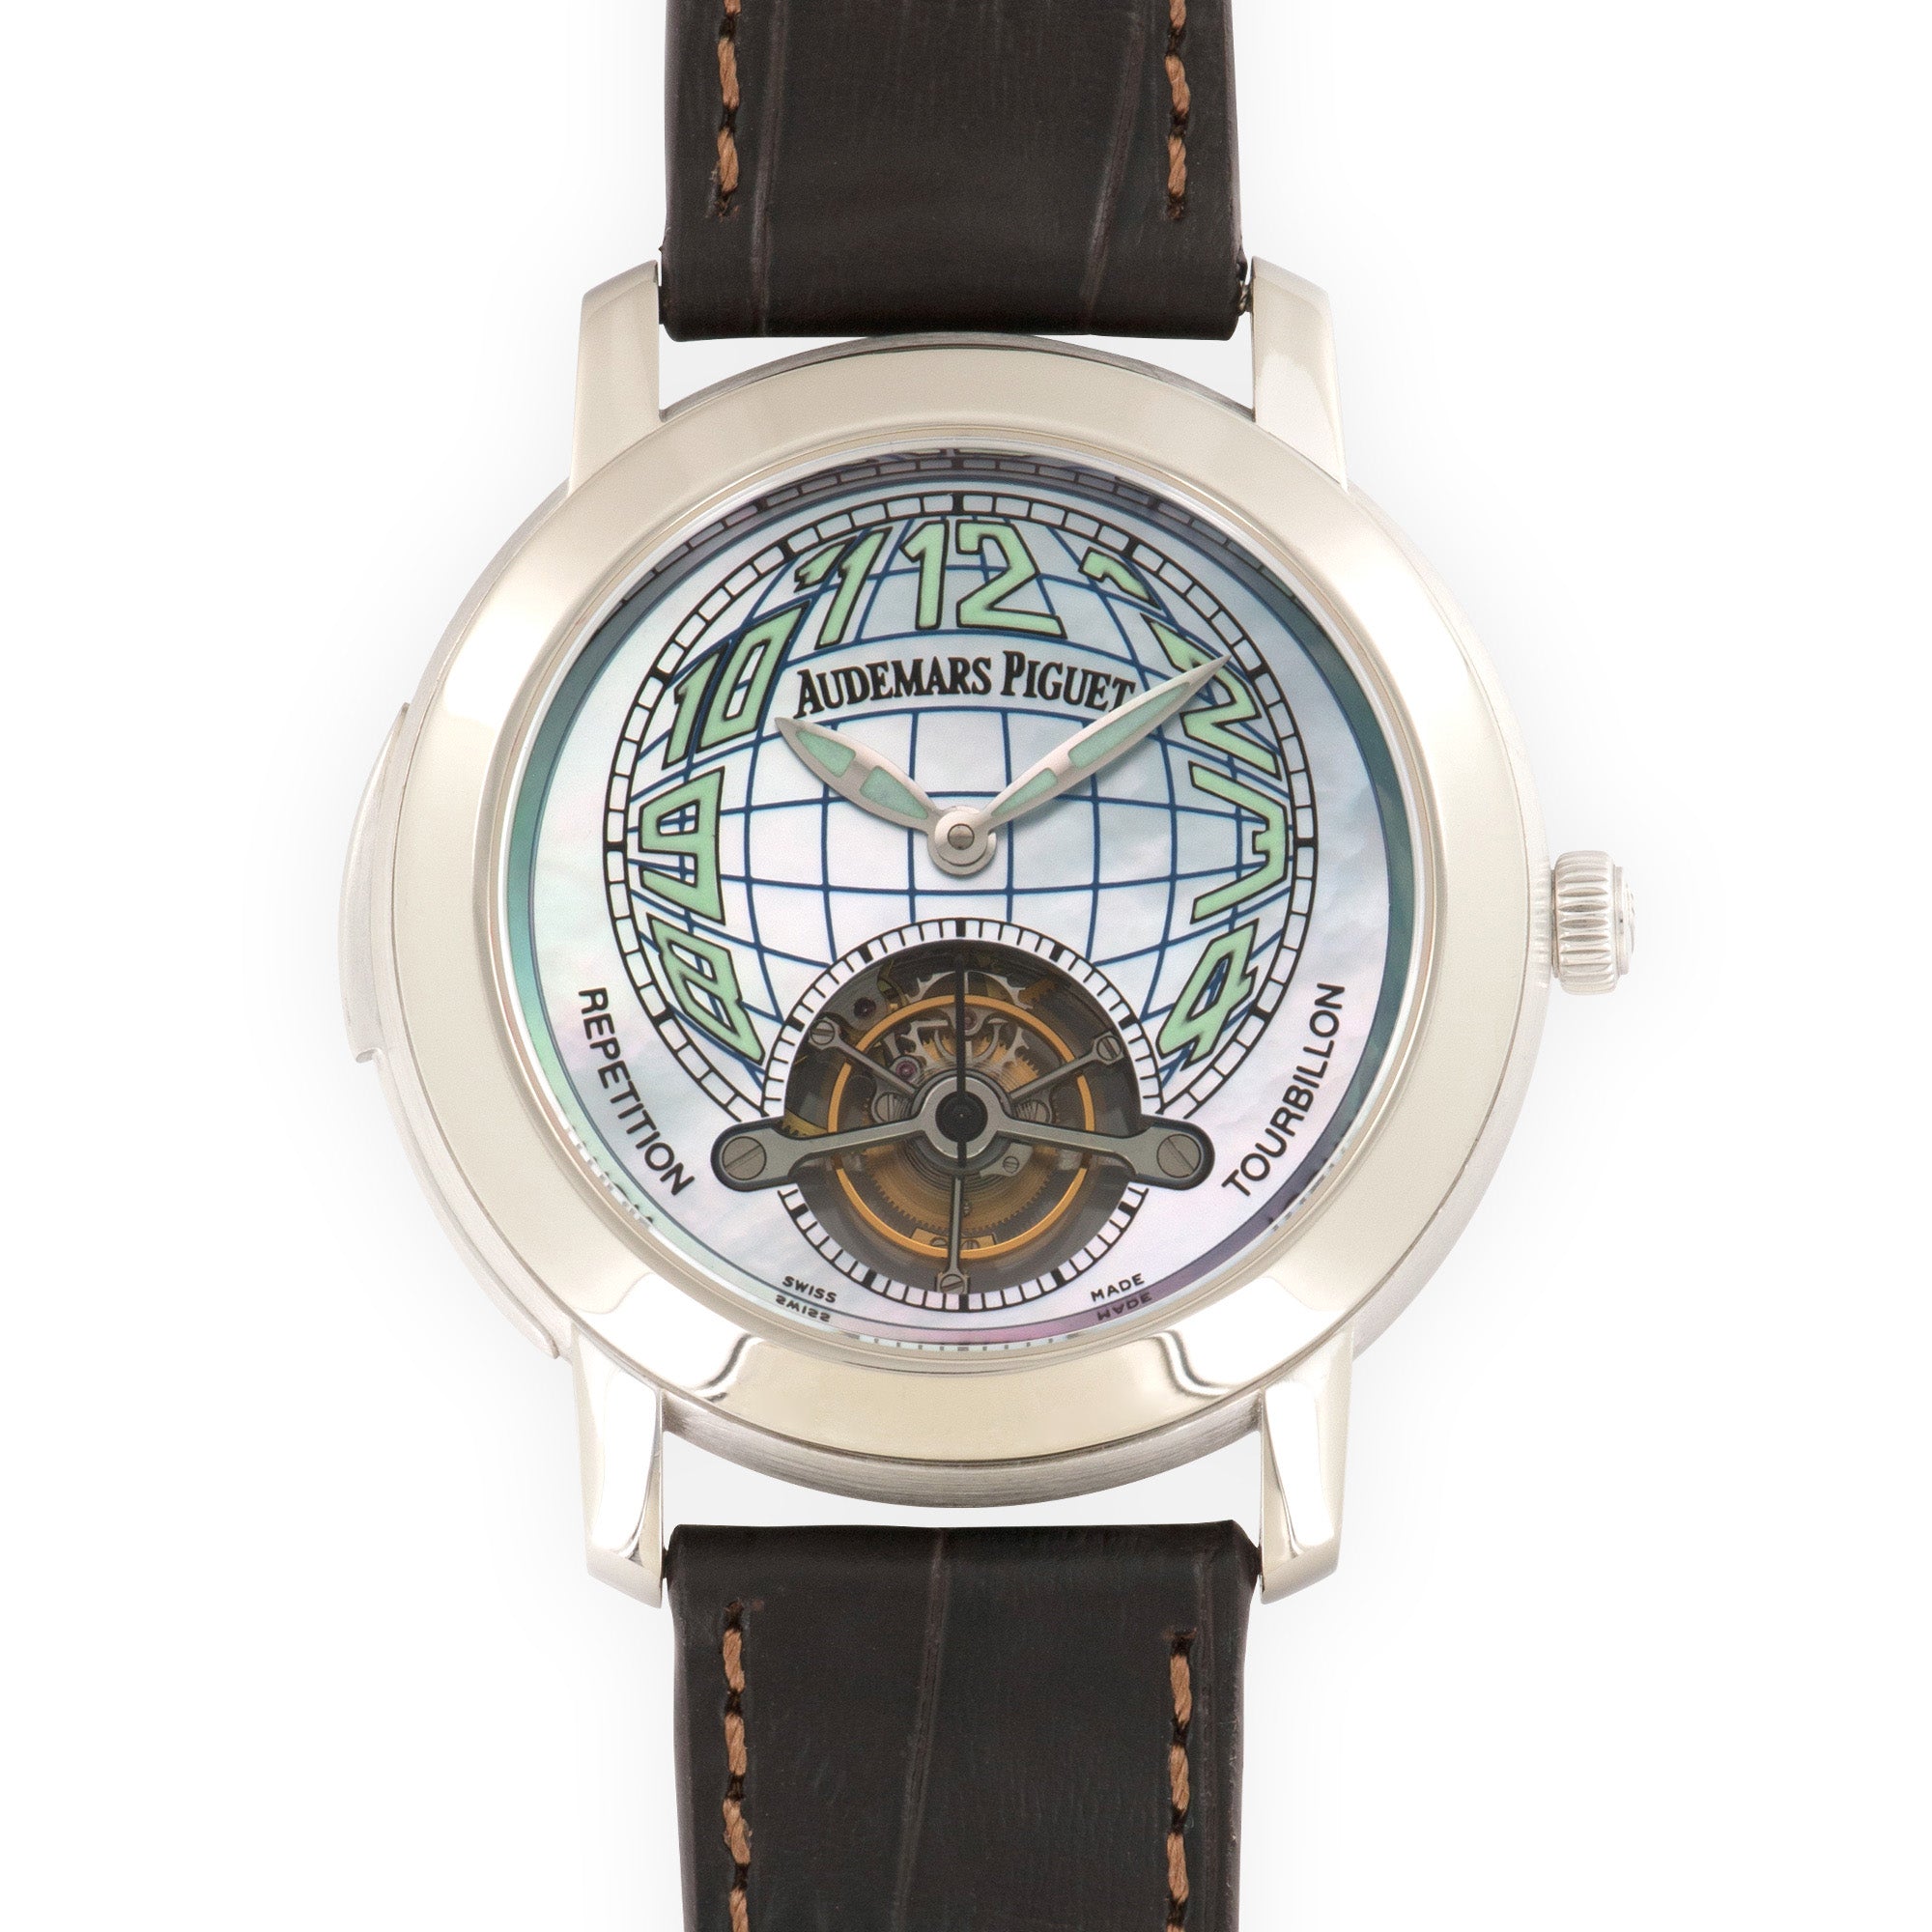 Audemars Piguet - Audemars Piguet Jules Audemars Minute Repeater Tourbillon Watch Ref. 25858 - The Keystone Watches